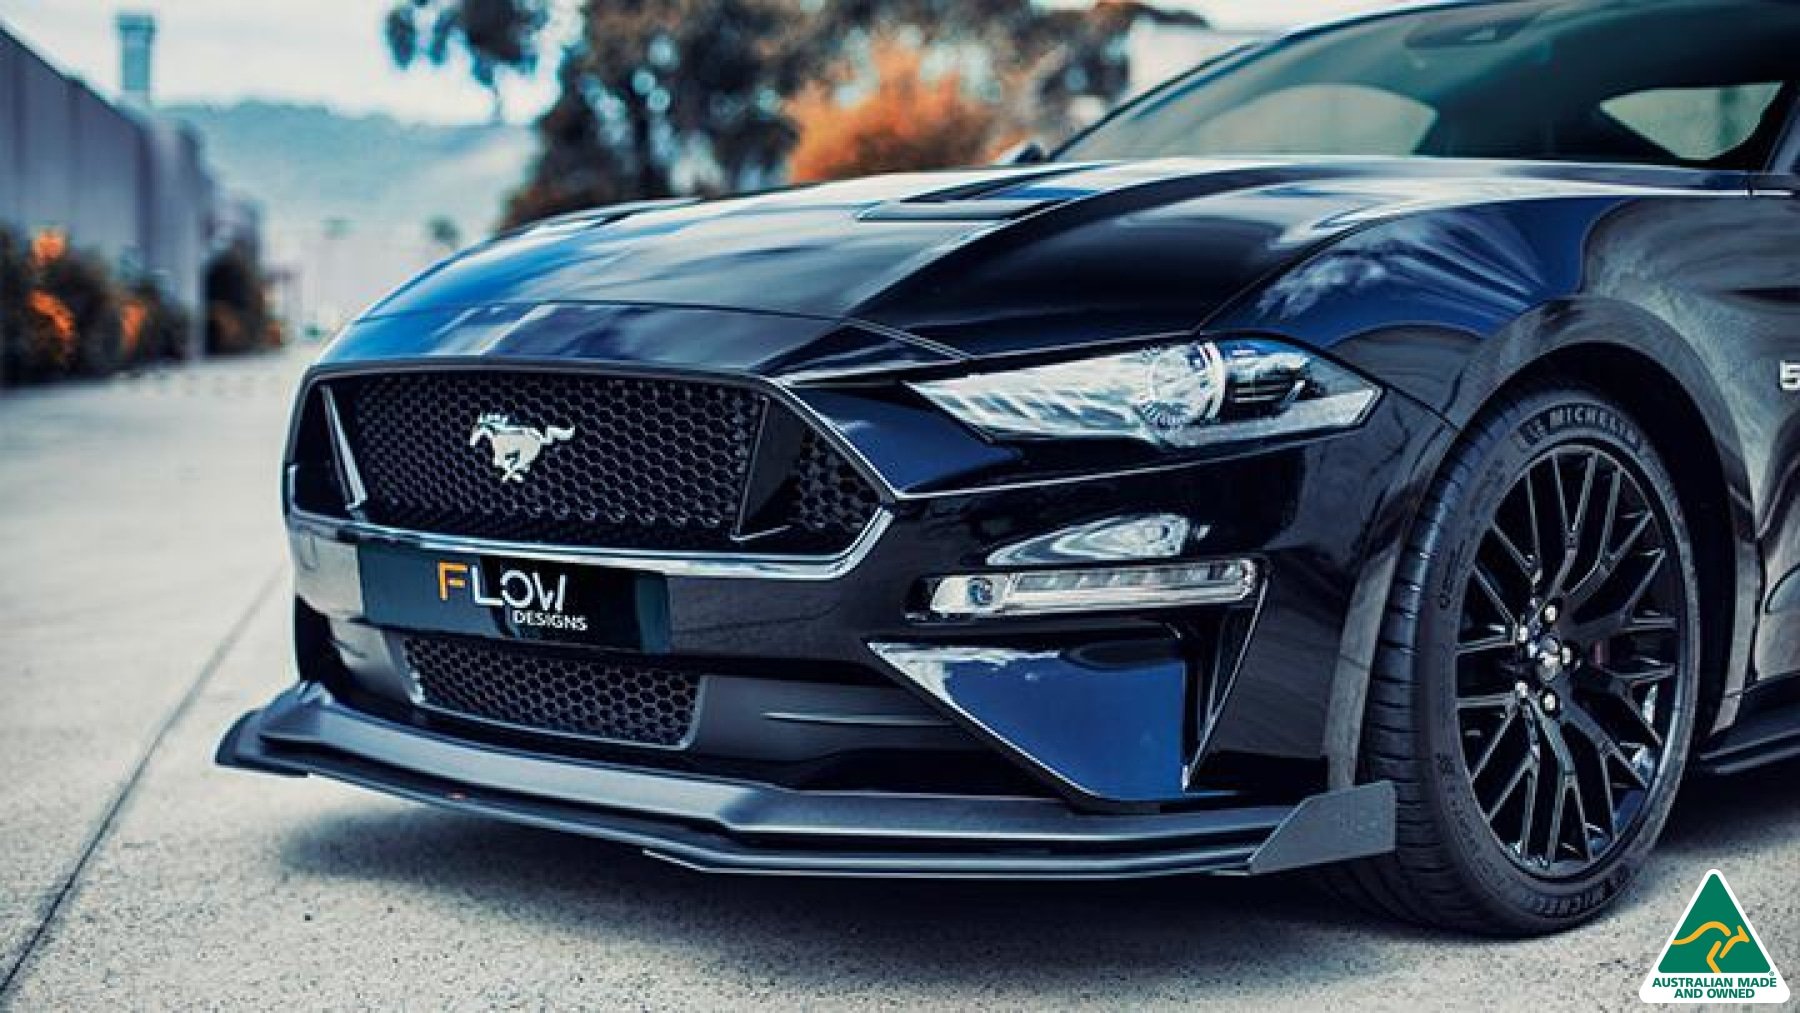 GT Mustang S550 FN Front Splitter Winglets (Pair) - MODE Auto Concepts